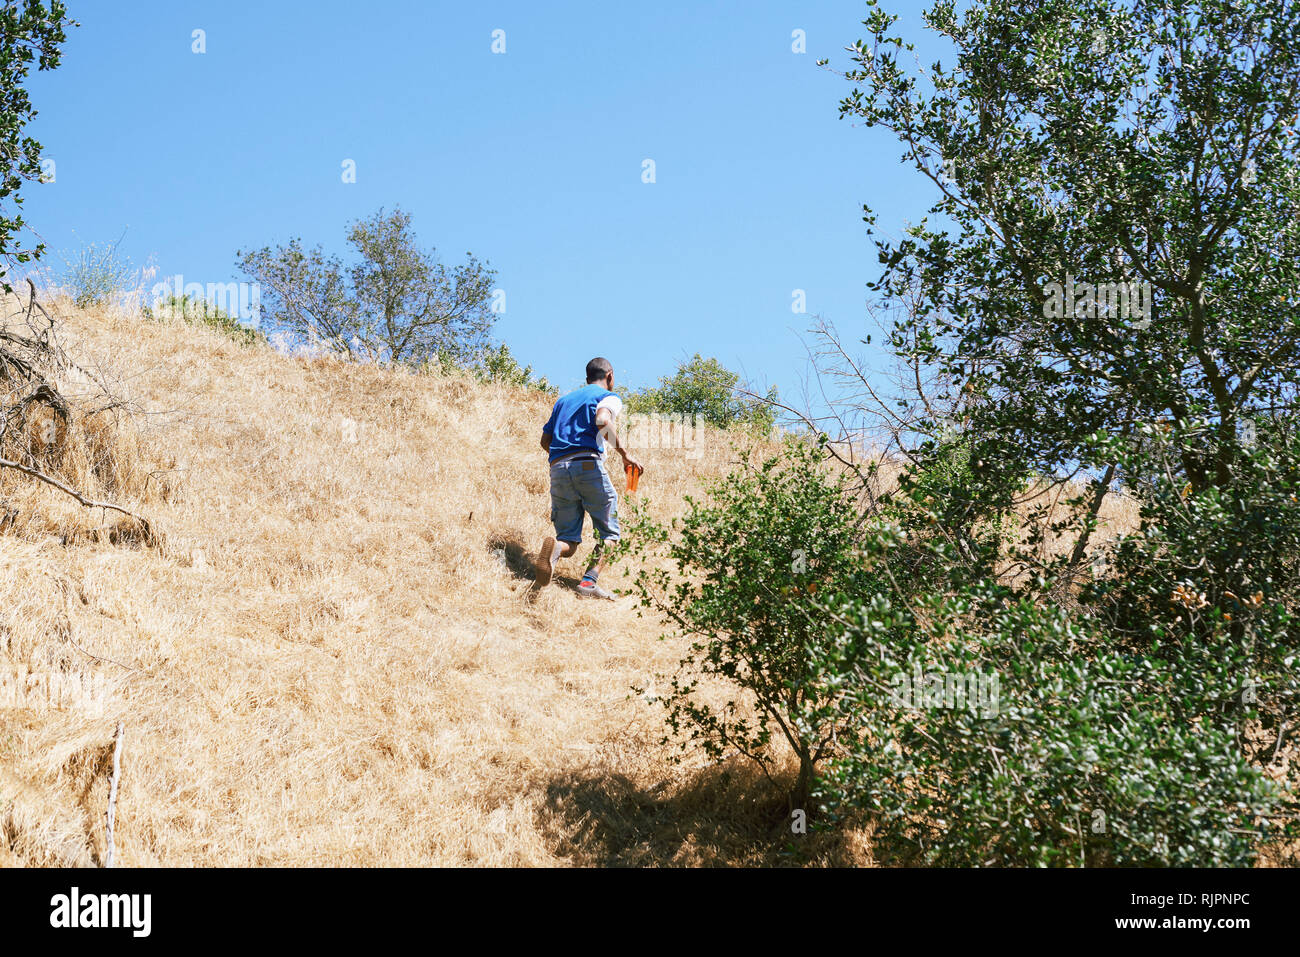 Young man walking up hill in park, Los Angeles, California, USA Stock Photo